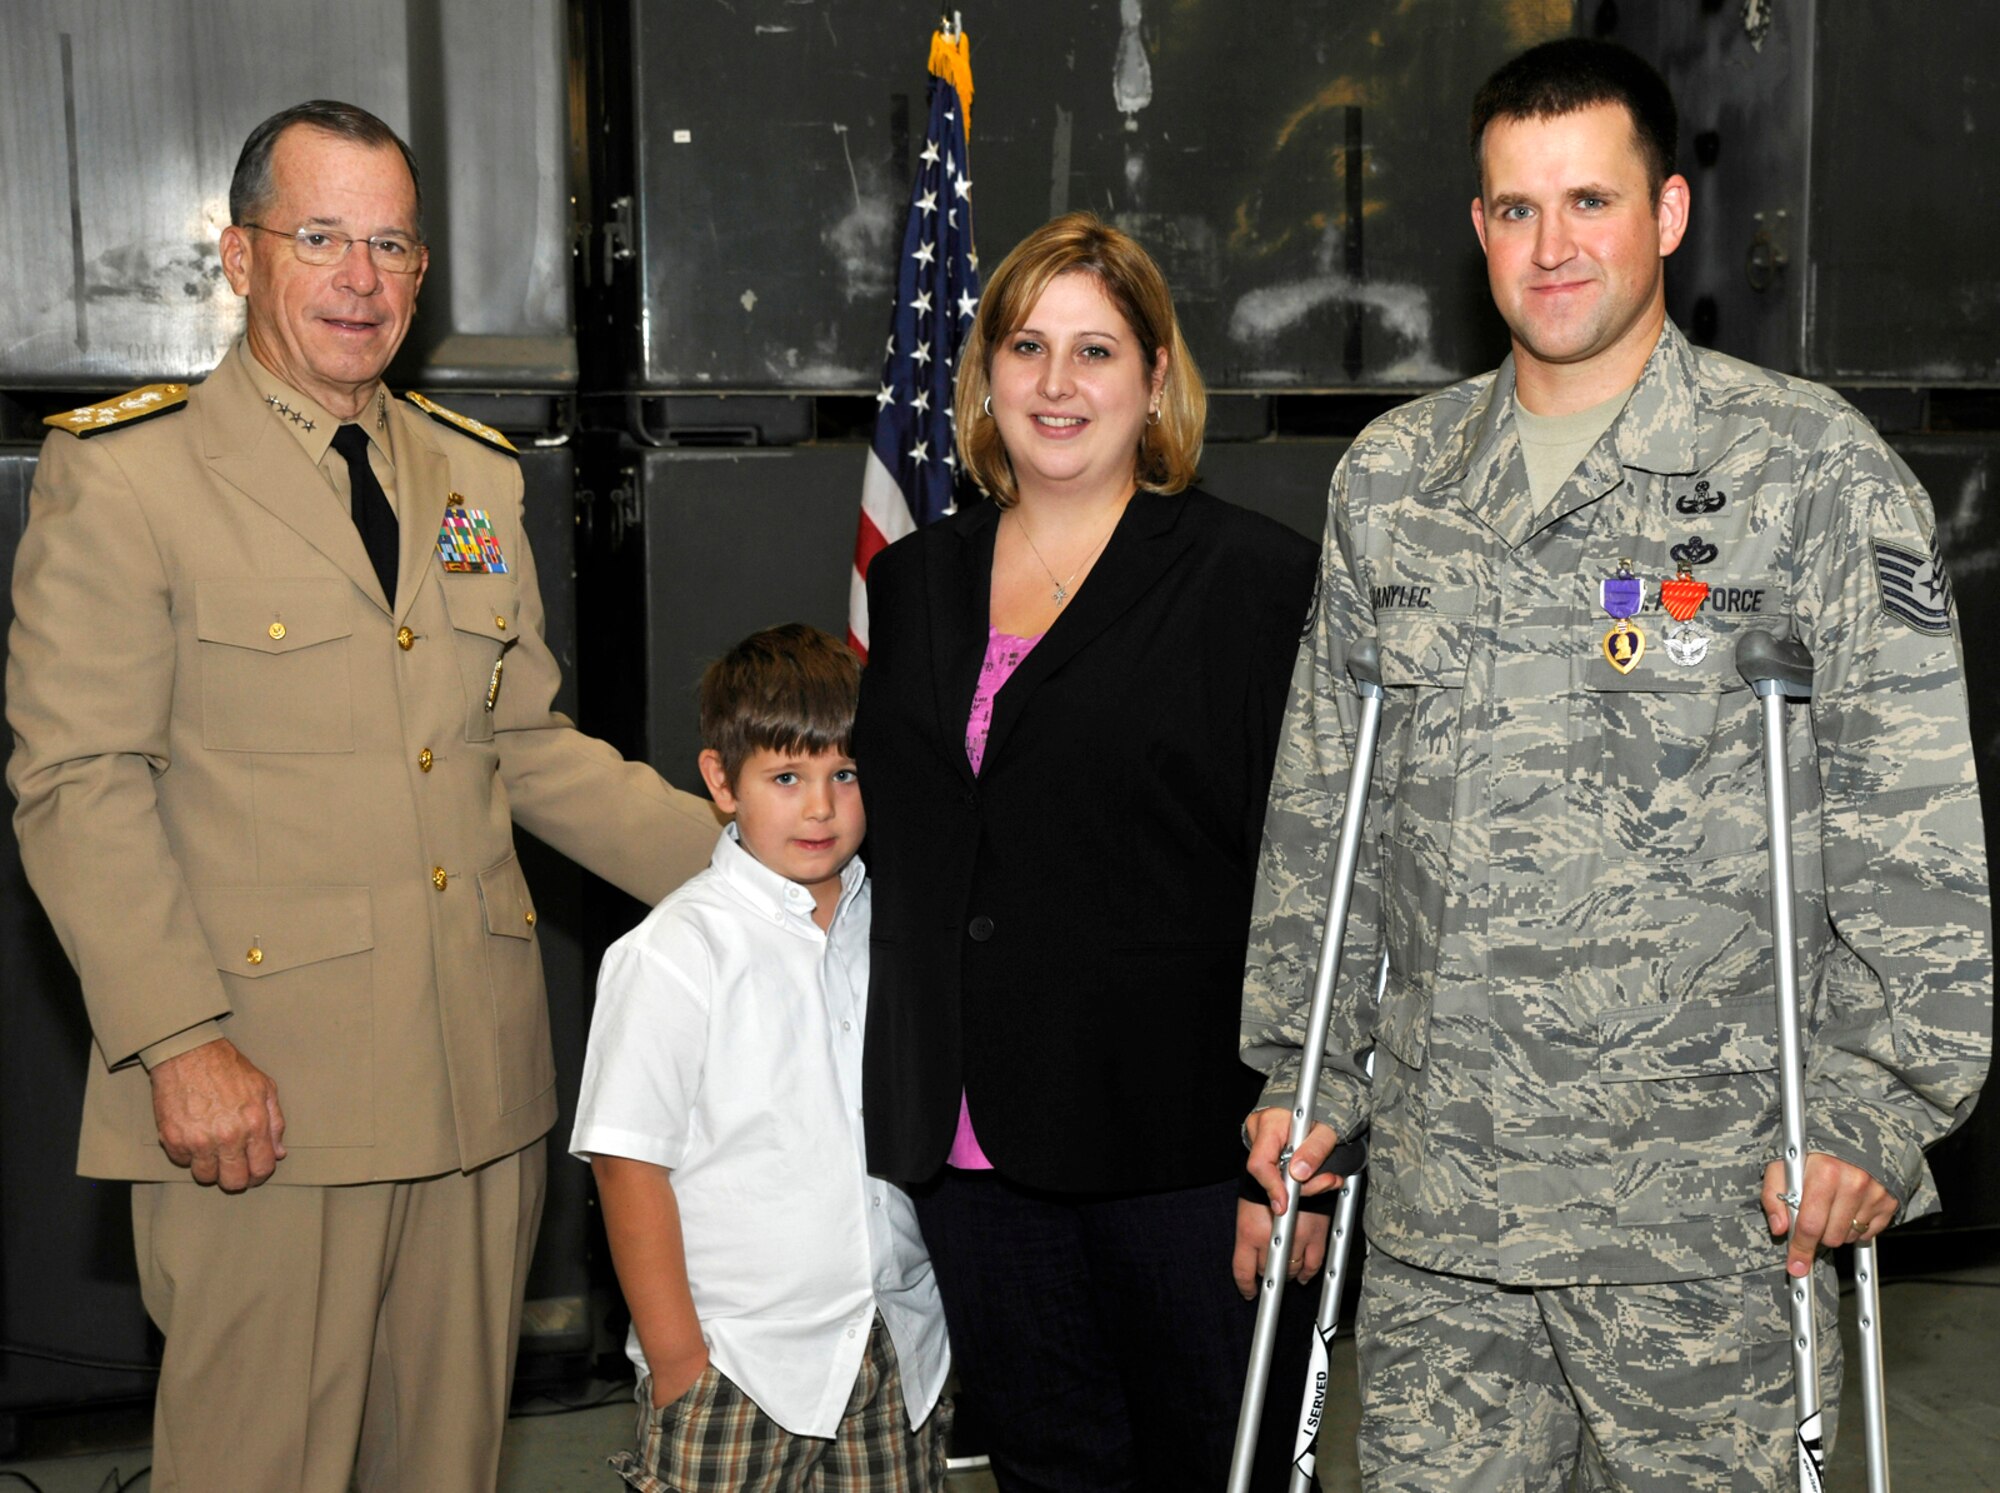 Admiral Mike Mullen, Chairman of the Joint Chiefs of Staff, stands with Tech Sgt. Michael Danylec, 11th Civil Engineer Squadron Explosive Ordnance Disposal technician, and his family after presenting Danylec with the Purple Heart on Sept. 16.  Danylec was severly injured while disarming an improvised explosive device while deployed to the Kandahar Province in Afghanistan.  (U.S. Air Force Photo/Airman 1st Class Lindsey Beadle)